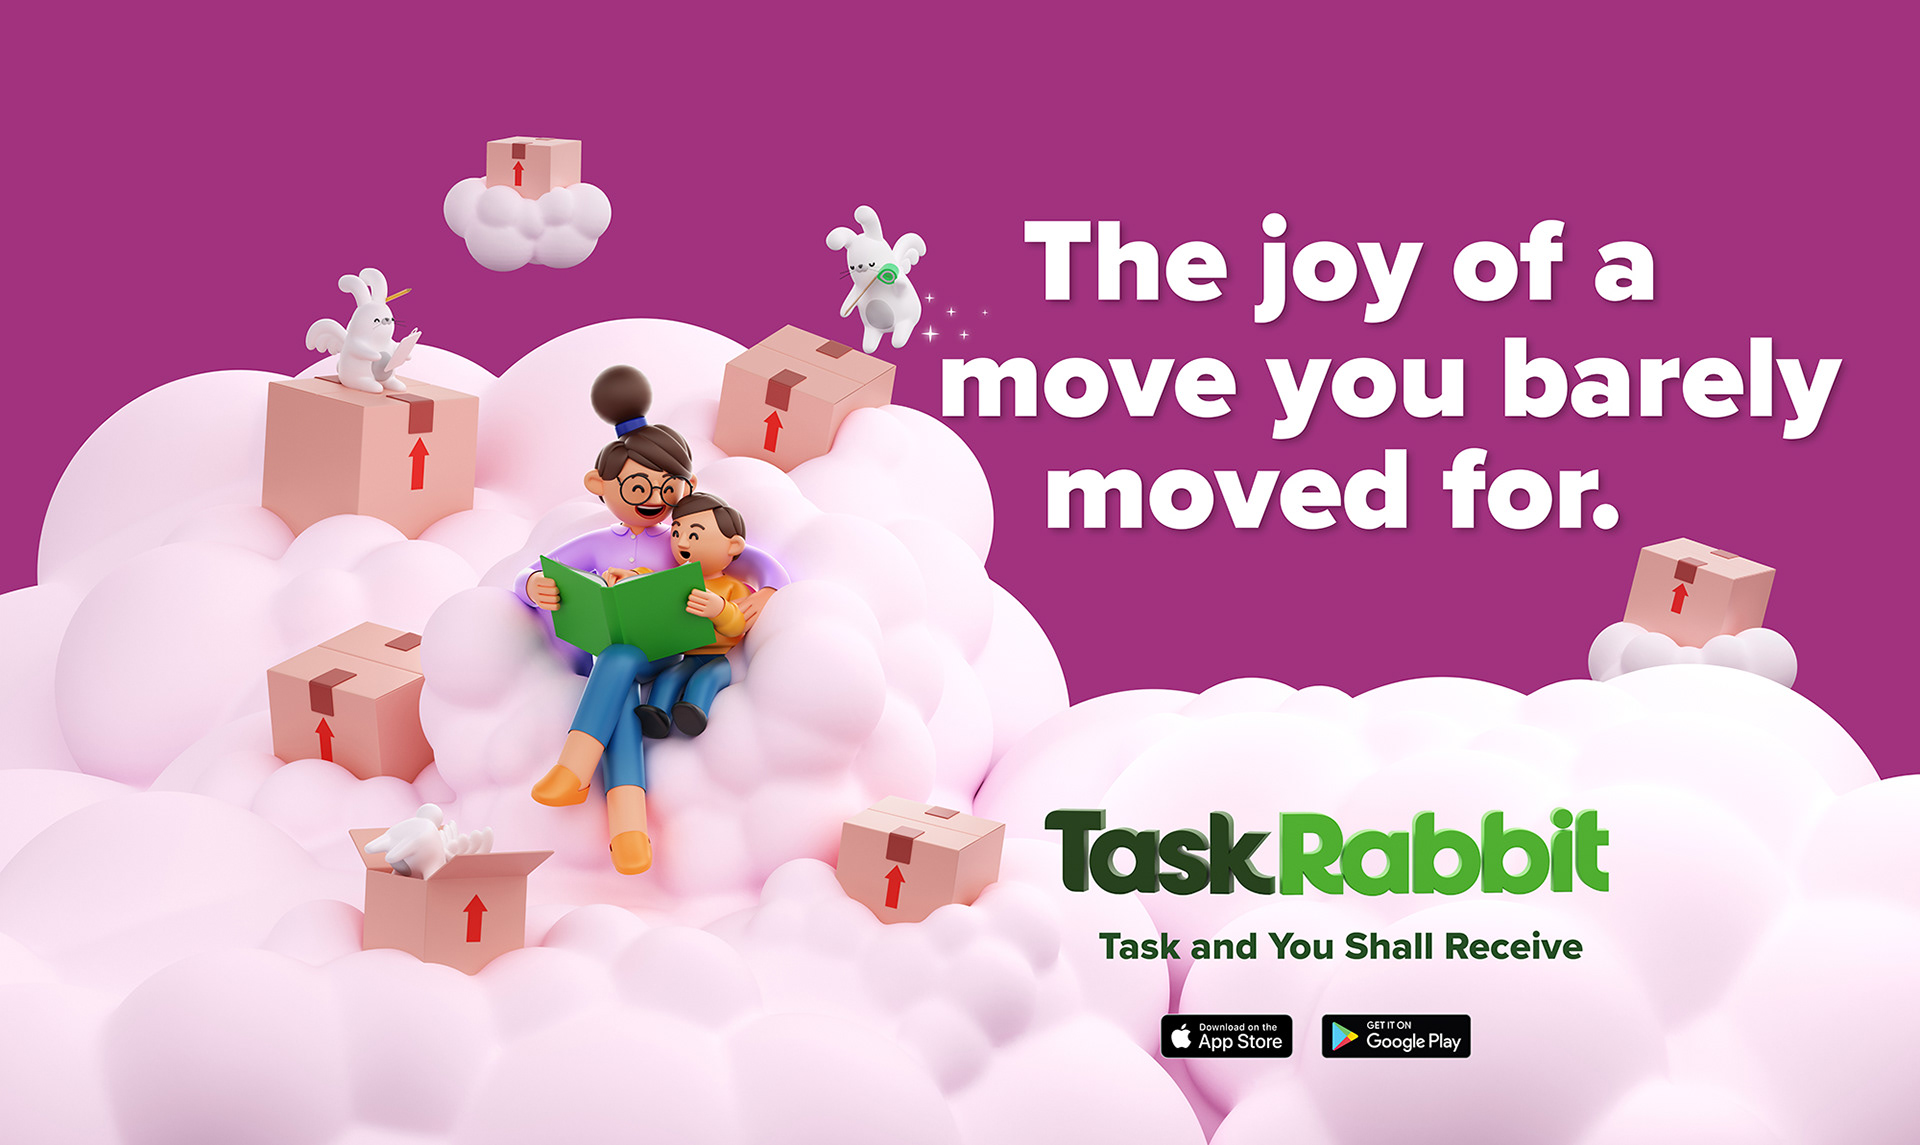 Task Rabbit - Task and you shall receive. on Behanceb5f15184169265.5d53fae9870dc.jpg